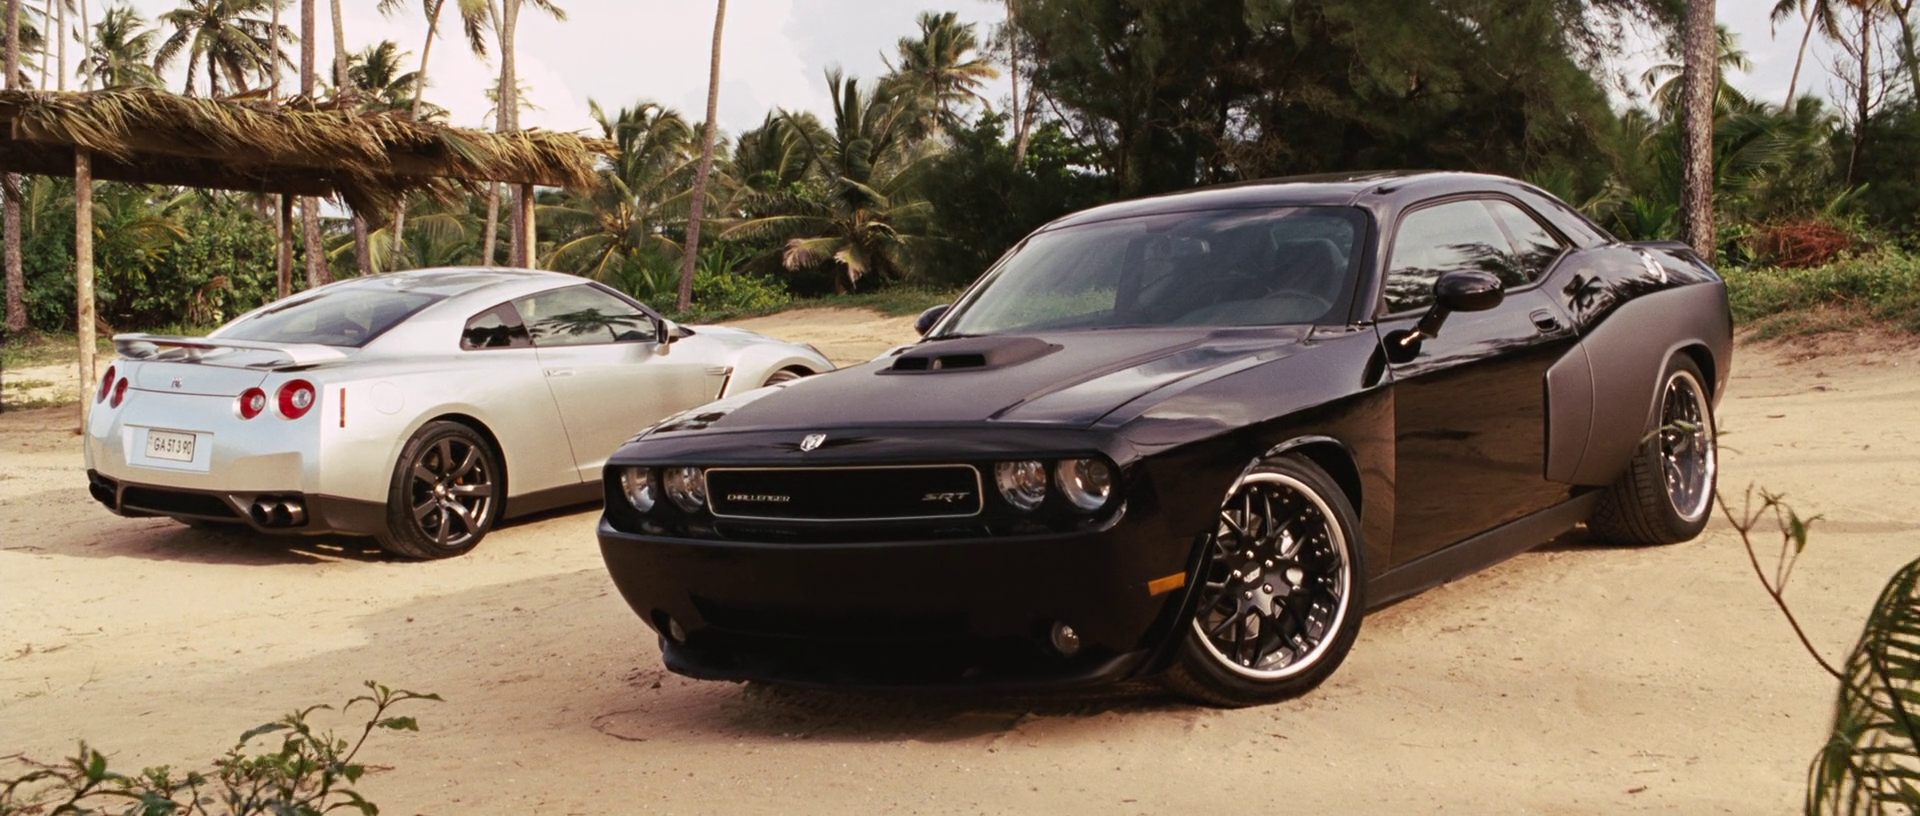 Adviento Significado Ineficiente 2009 Dodge Challenger SRT-8 | The Fast and the Furious Wiki | Fandom